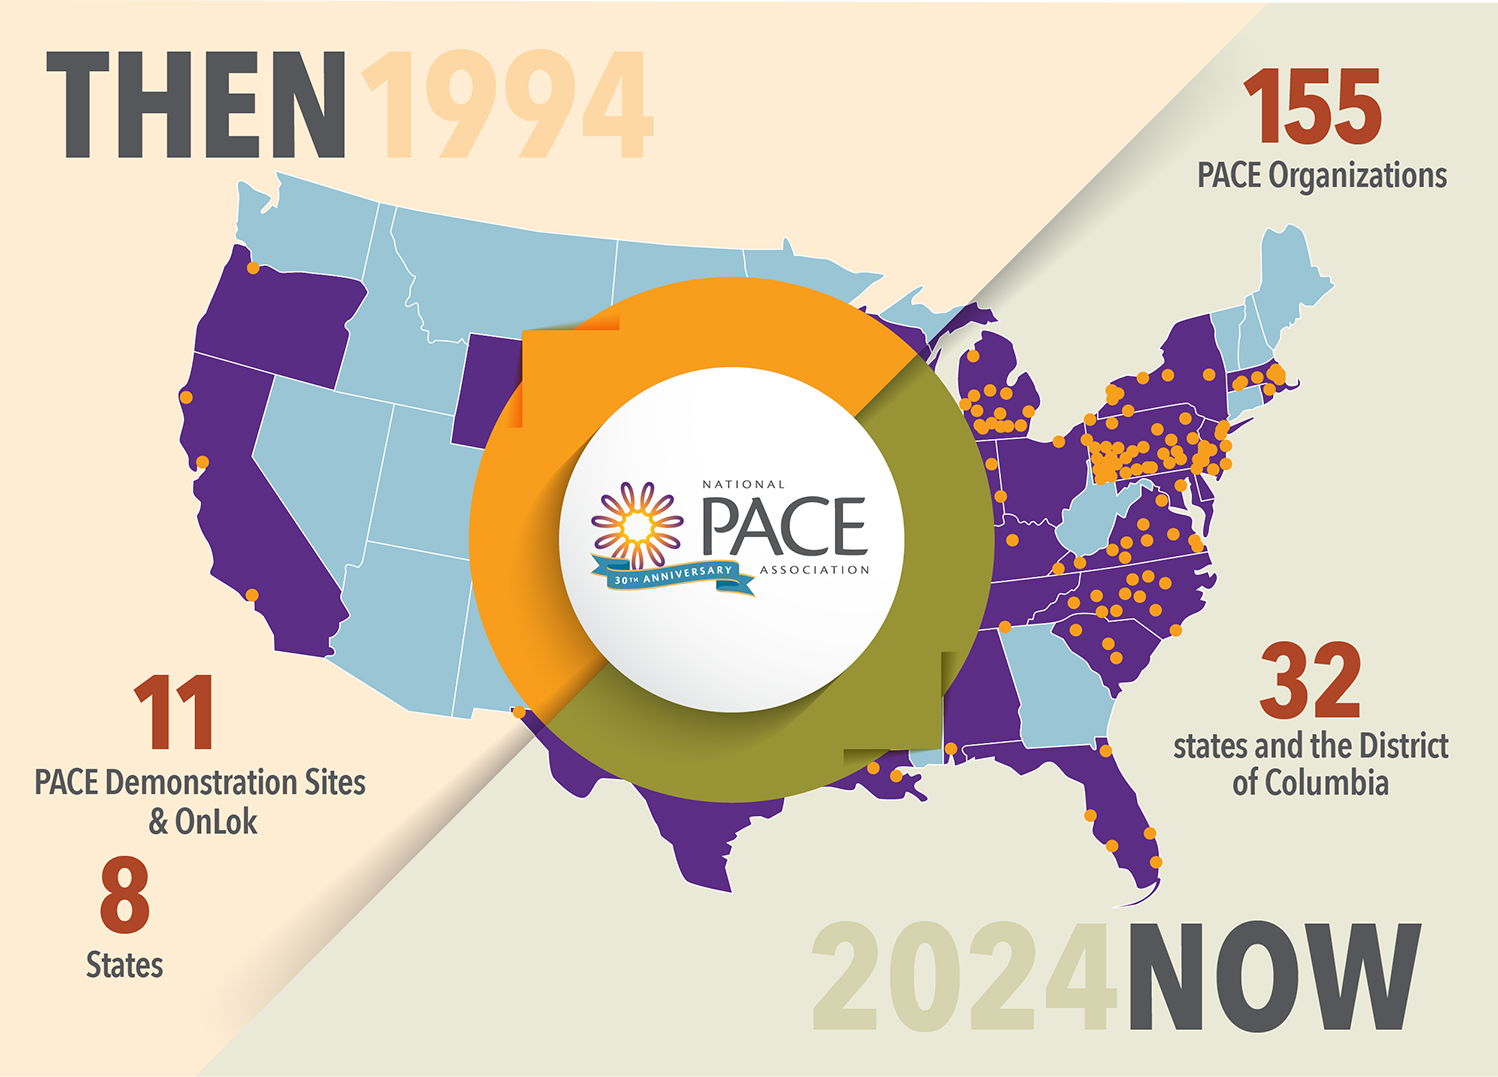 January 30th Anniversary Then and Now campaign artwork - number of PACE orgs/sites